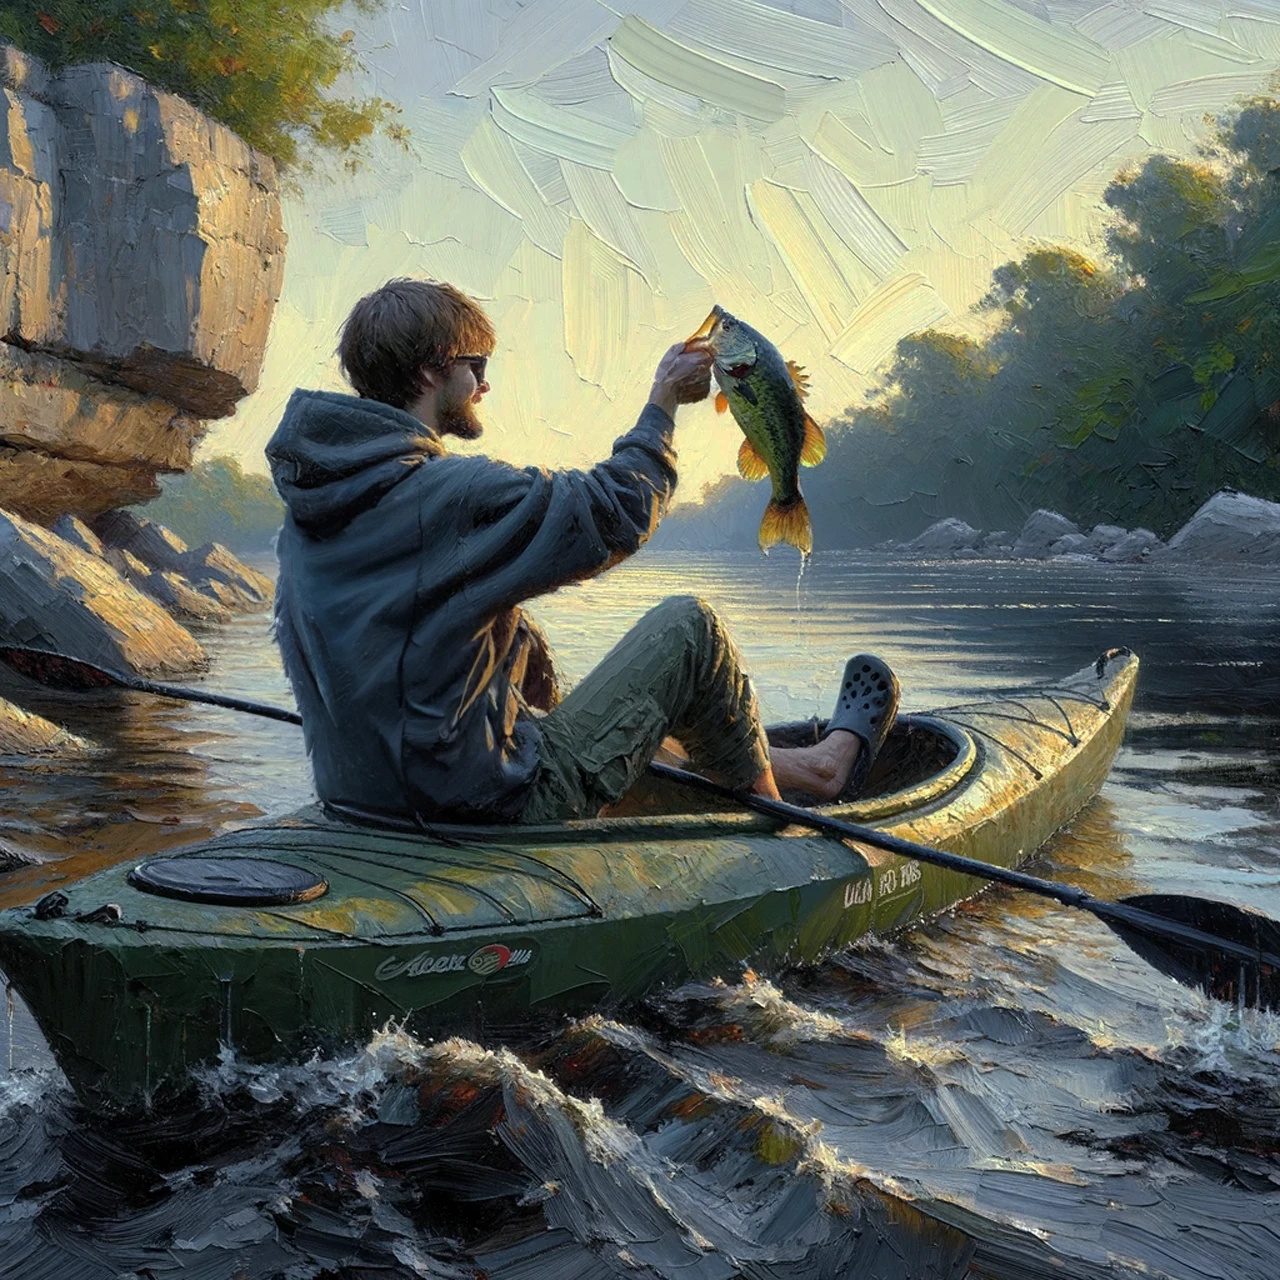 An impressionist style painting of a man sitting in a kayak fishing